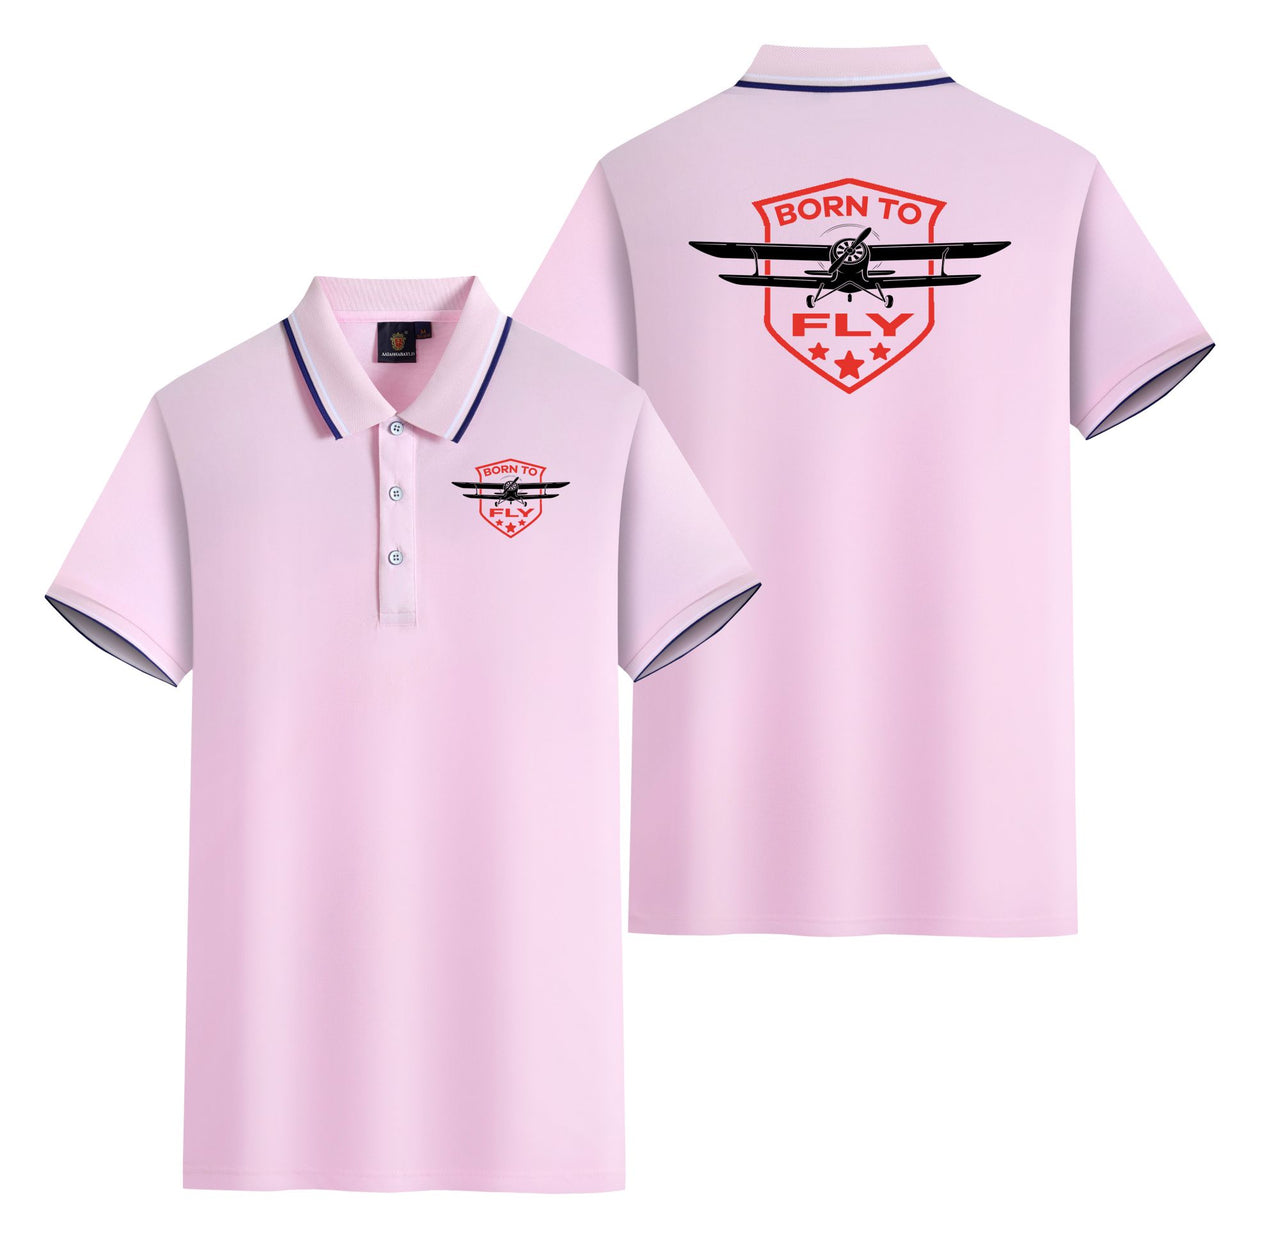 Super Born To Fly Designed Stylish Polo T-Shirts (Double-Side)